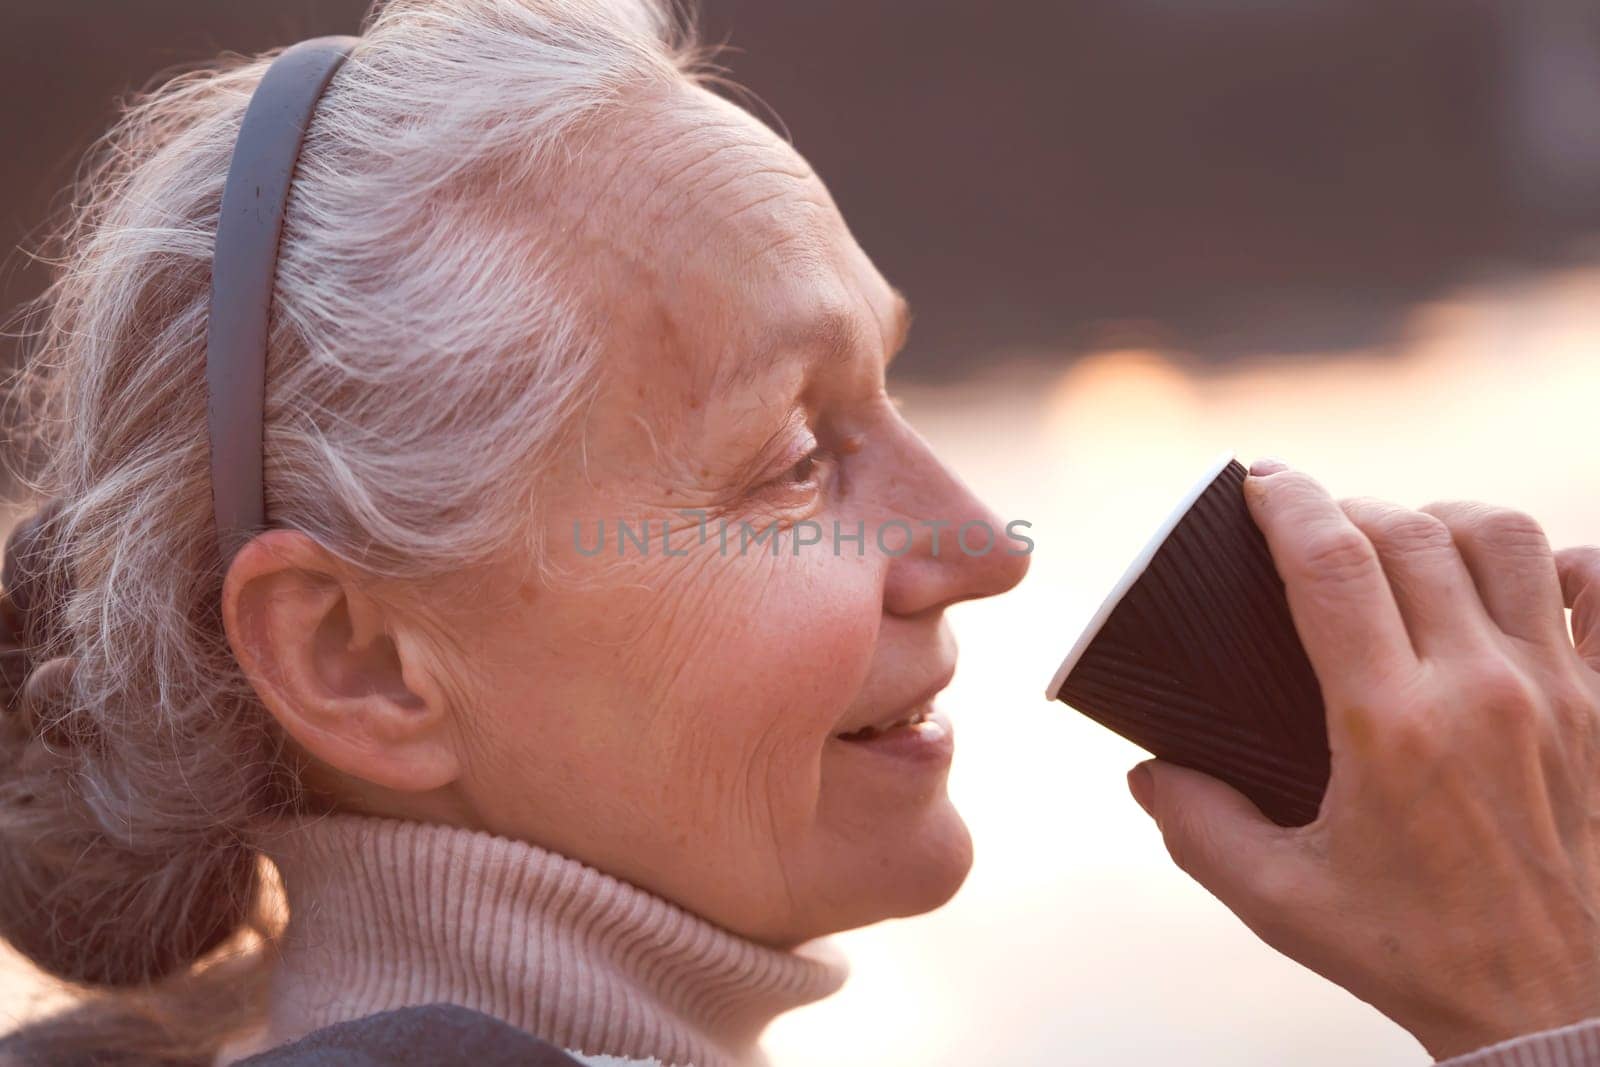 A beautiful elderly woman with gray hair and wrinkles on her face smiles and enjoys coffee or tea against the background of the river at sunrise or sunset in the city during a walk, portrait closeup.